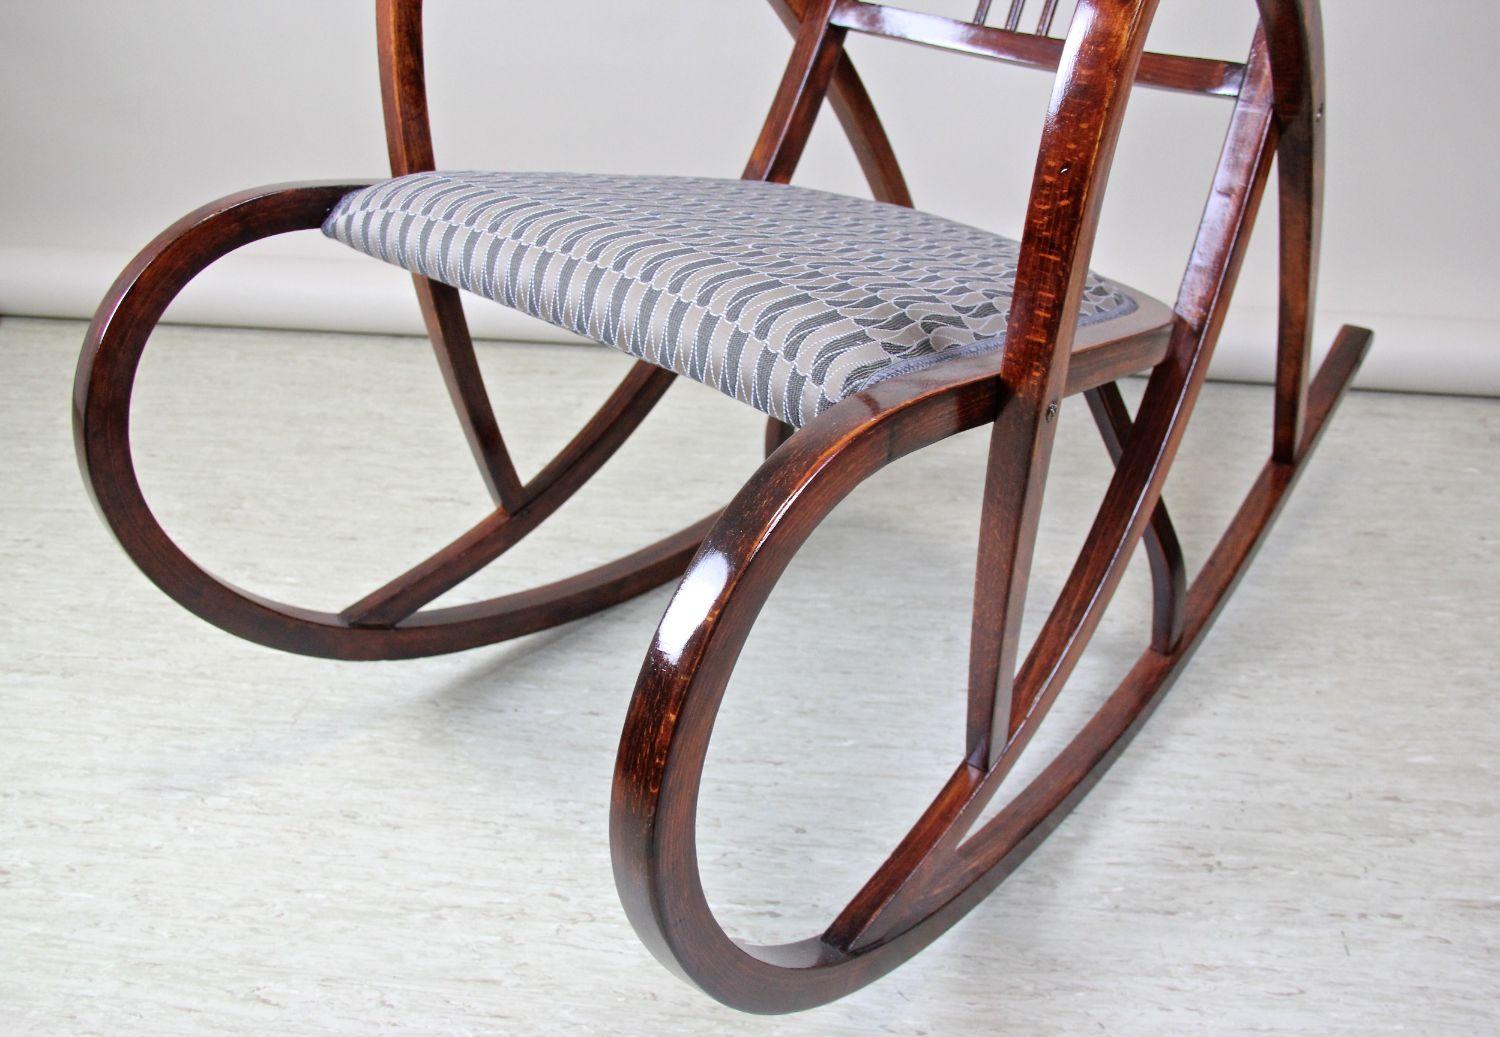 Bentwood Rocking Chair No. 511 by M. Kammerer for Thonet, Austria, circa 1905